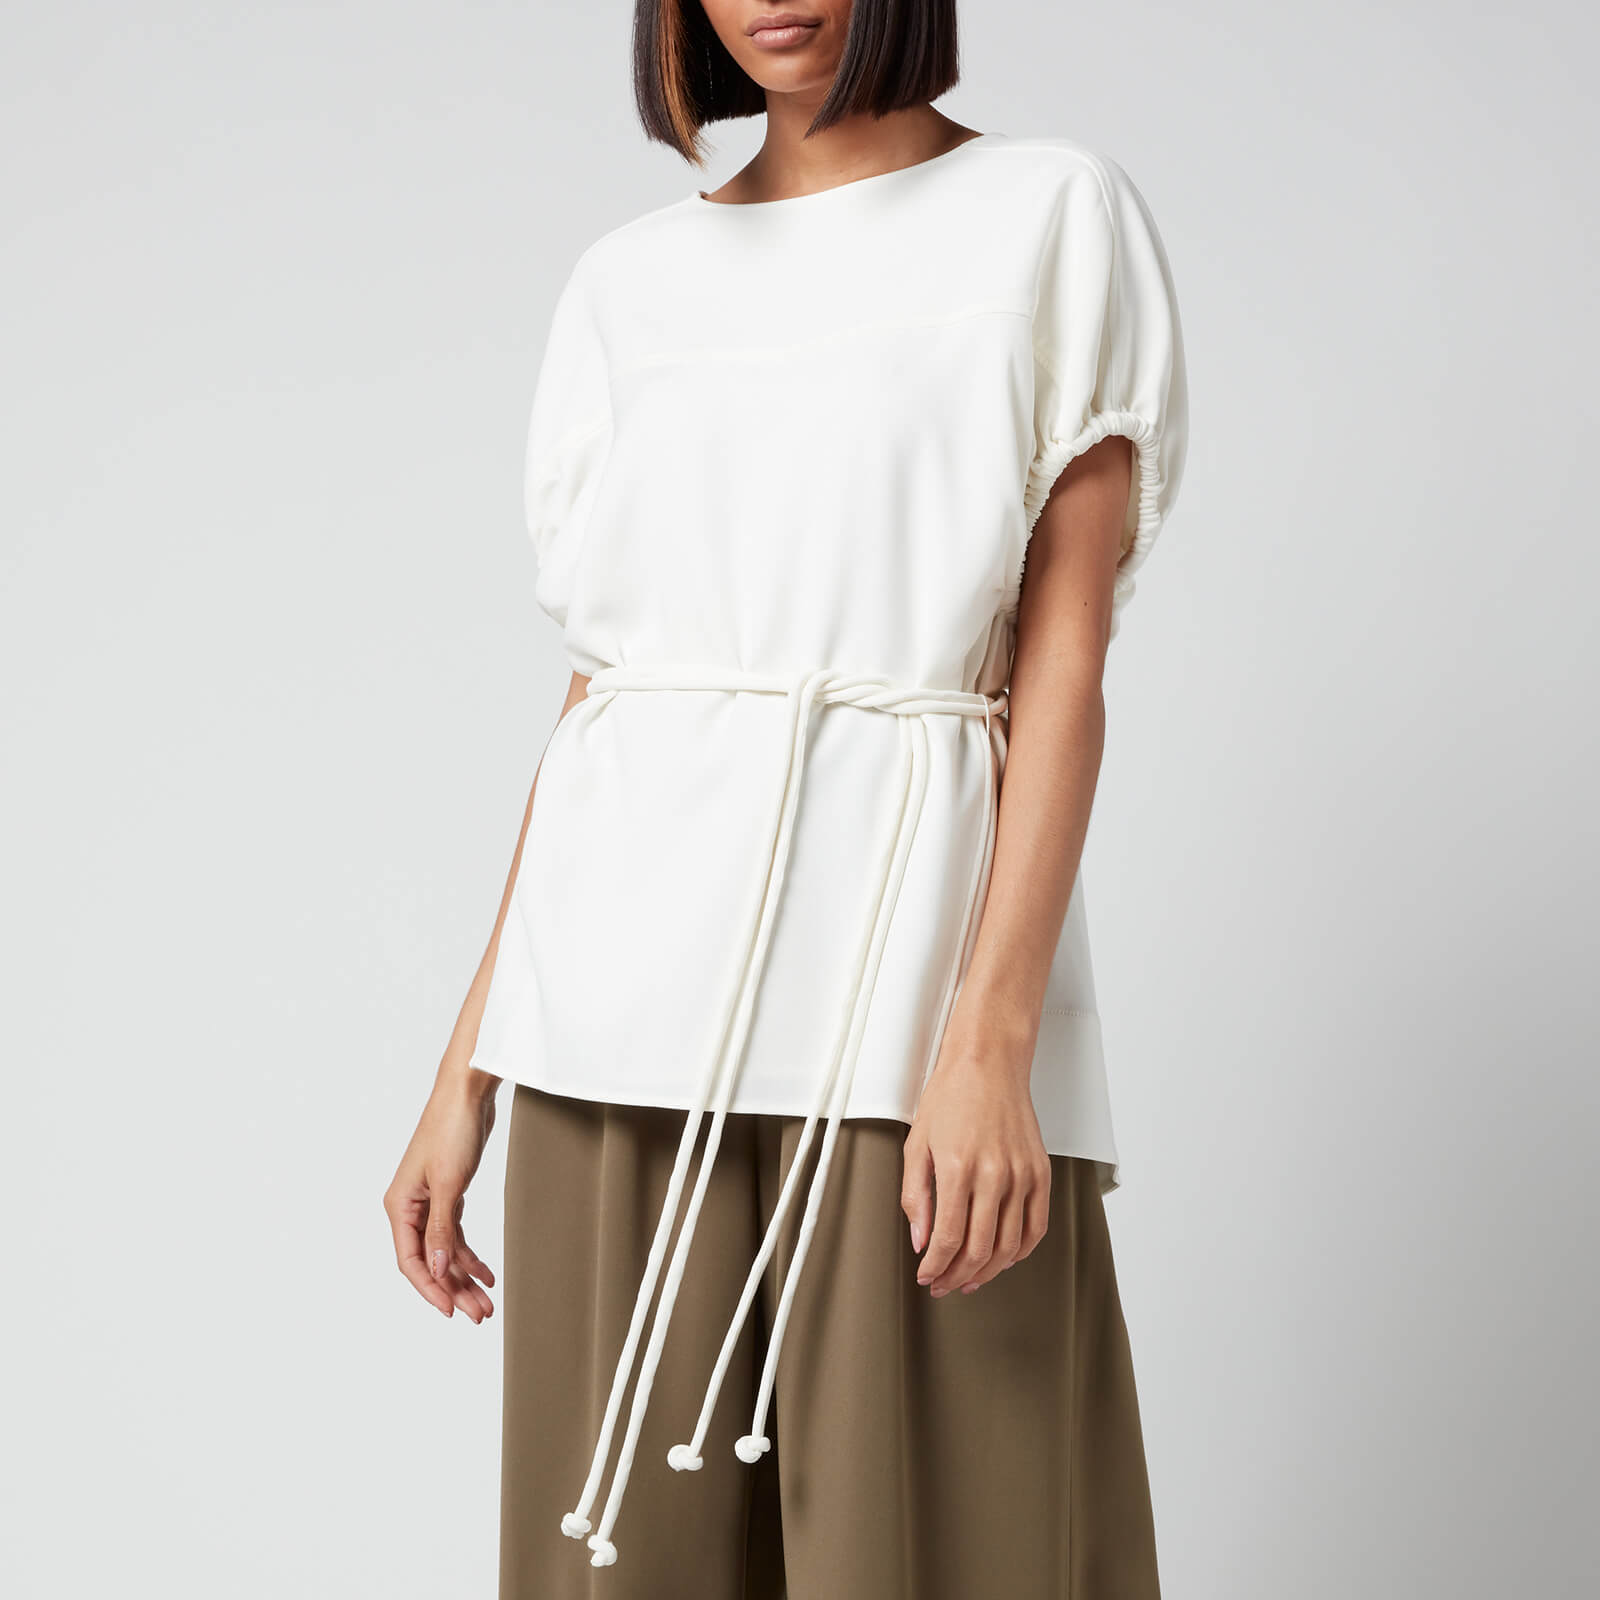 Proenza Schouler Women's Matte Crepe Rounded Sleeve Top - Off White - US 6/UK 10